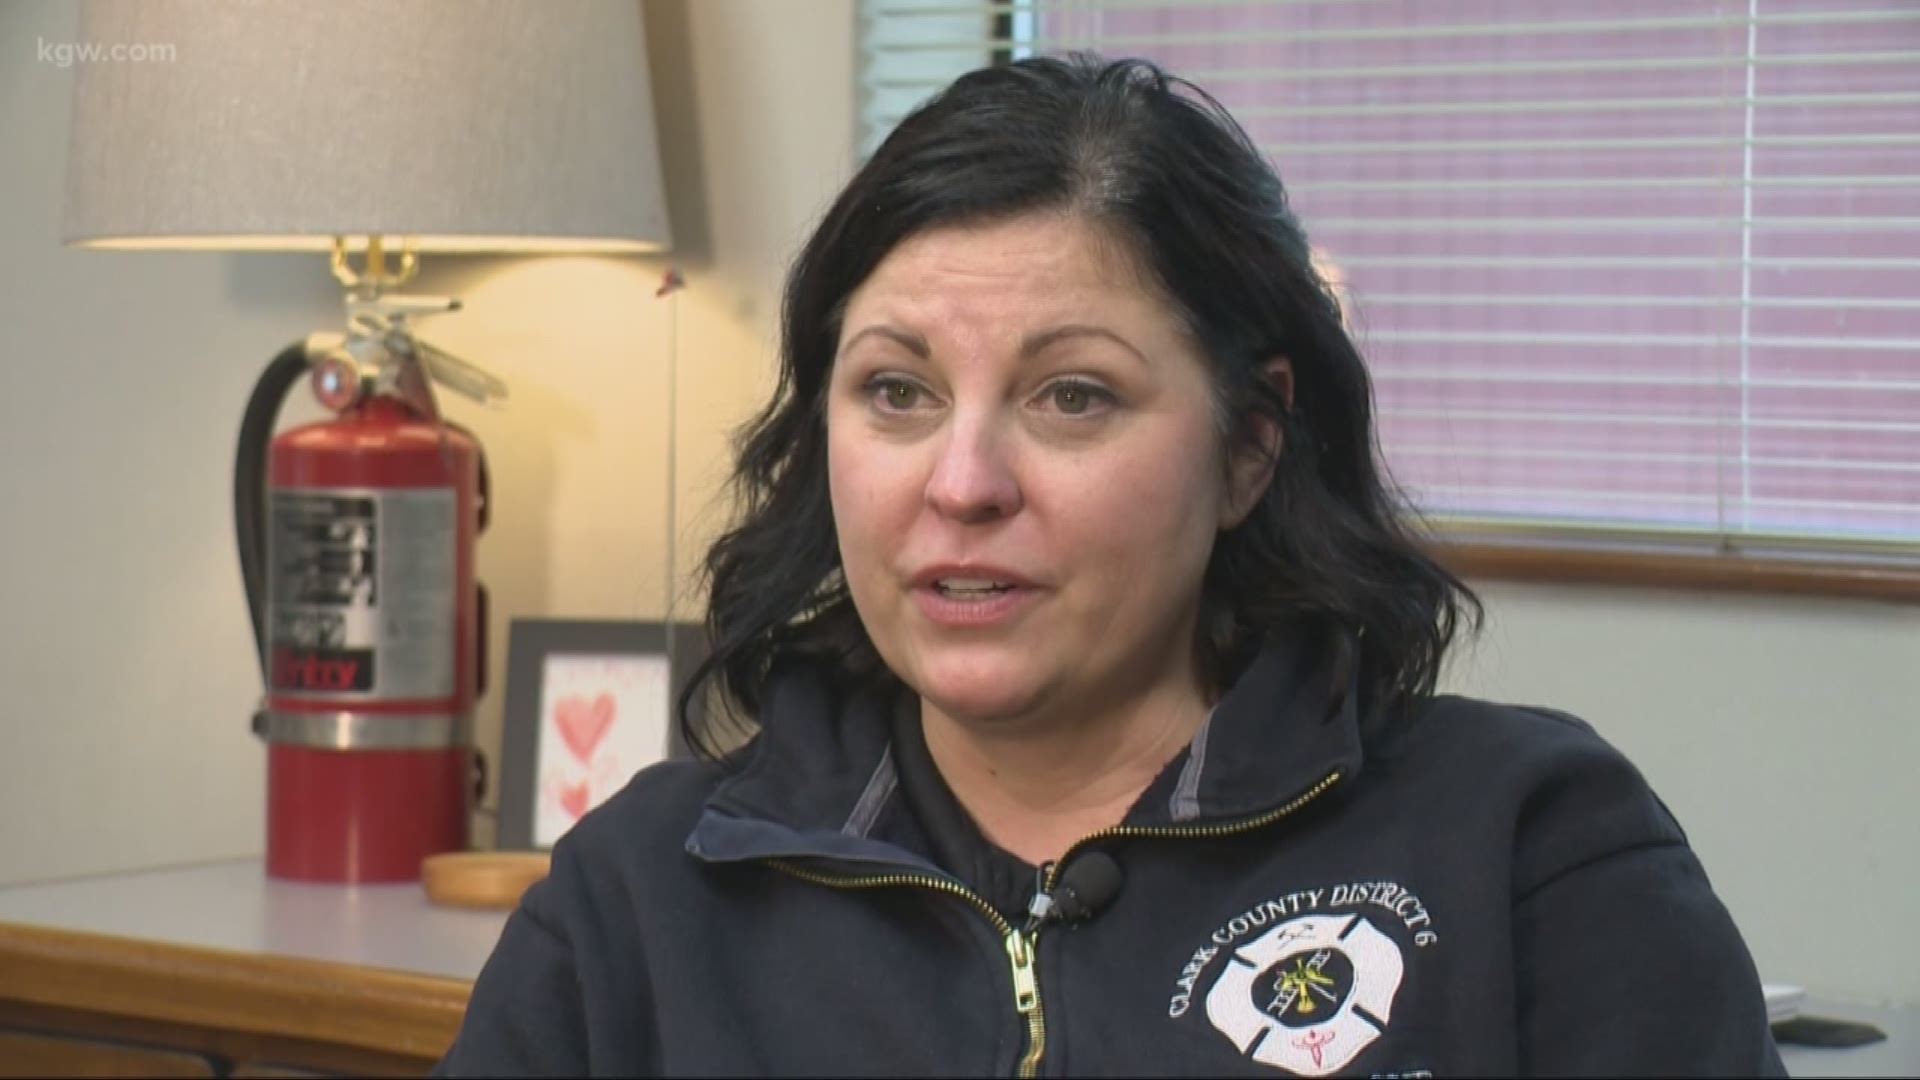 Clark County has its first female fire chief.